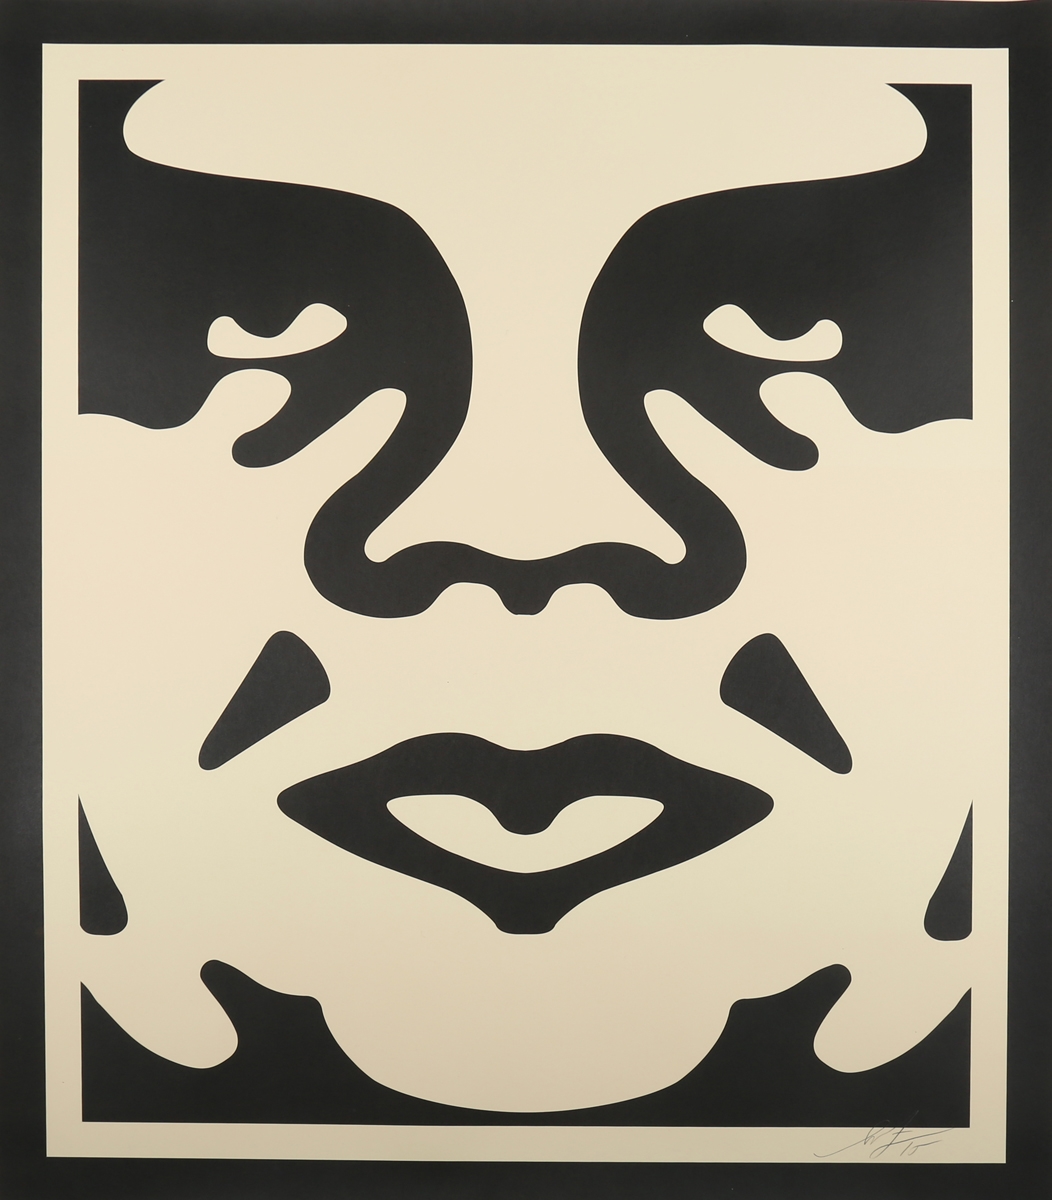 Obey (Andre the Giant Stencil) by Shepard Fairey, dated 2015